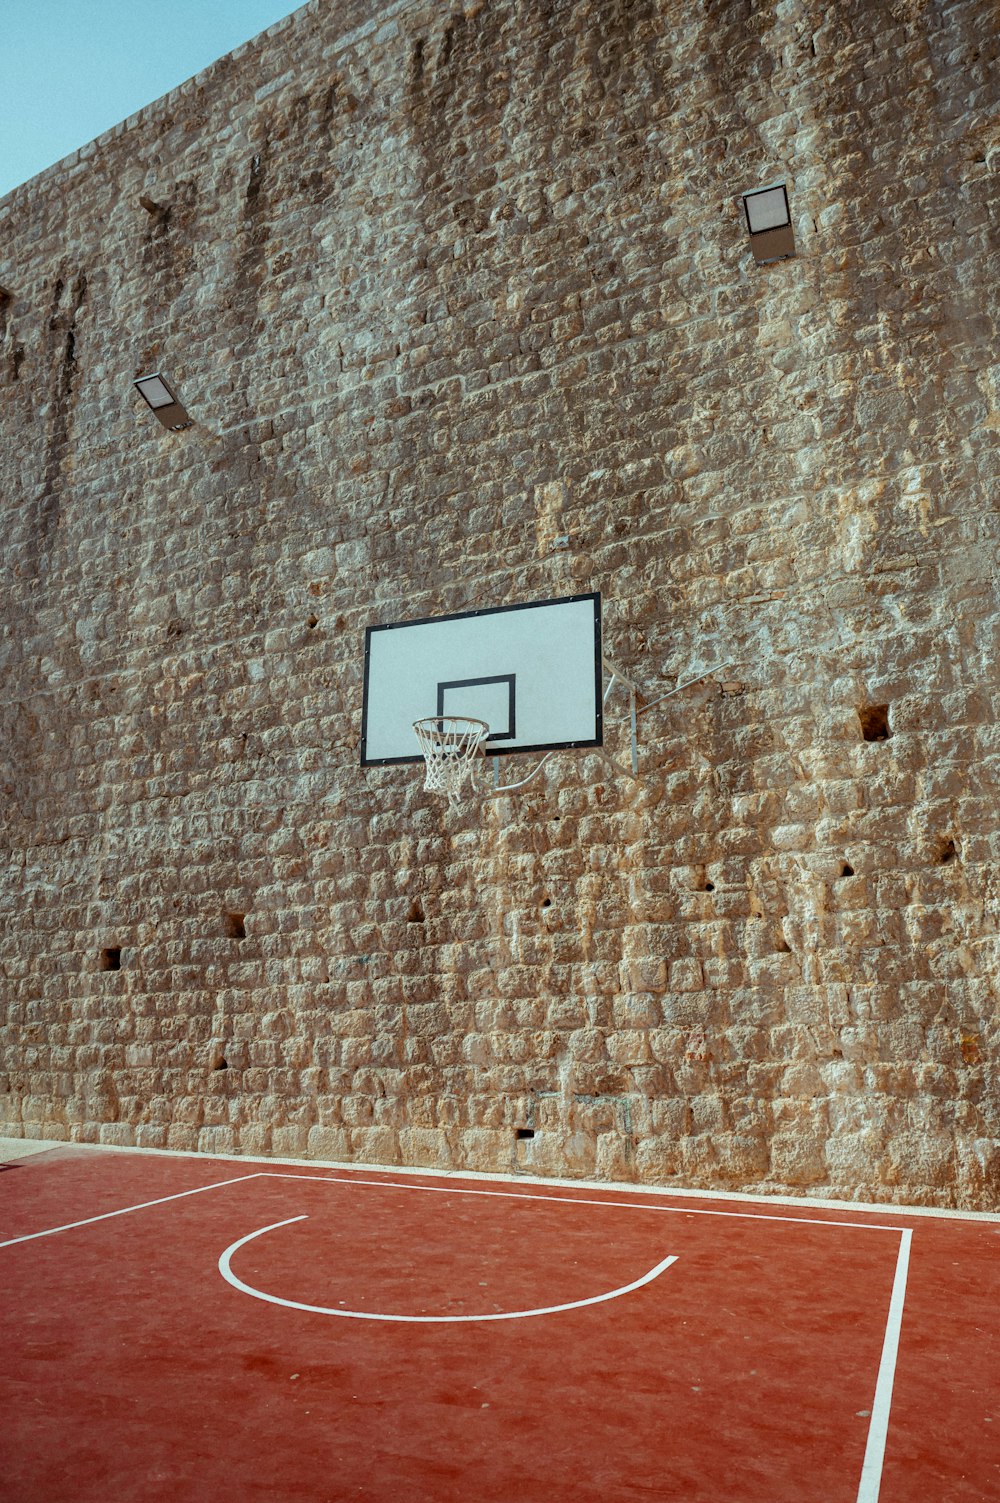 a basketball court in front of a brick wall